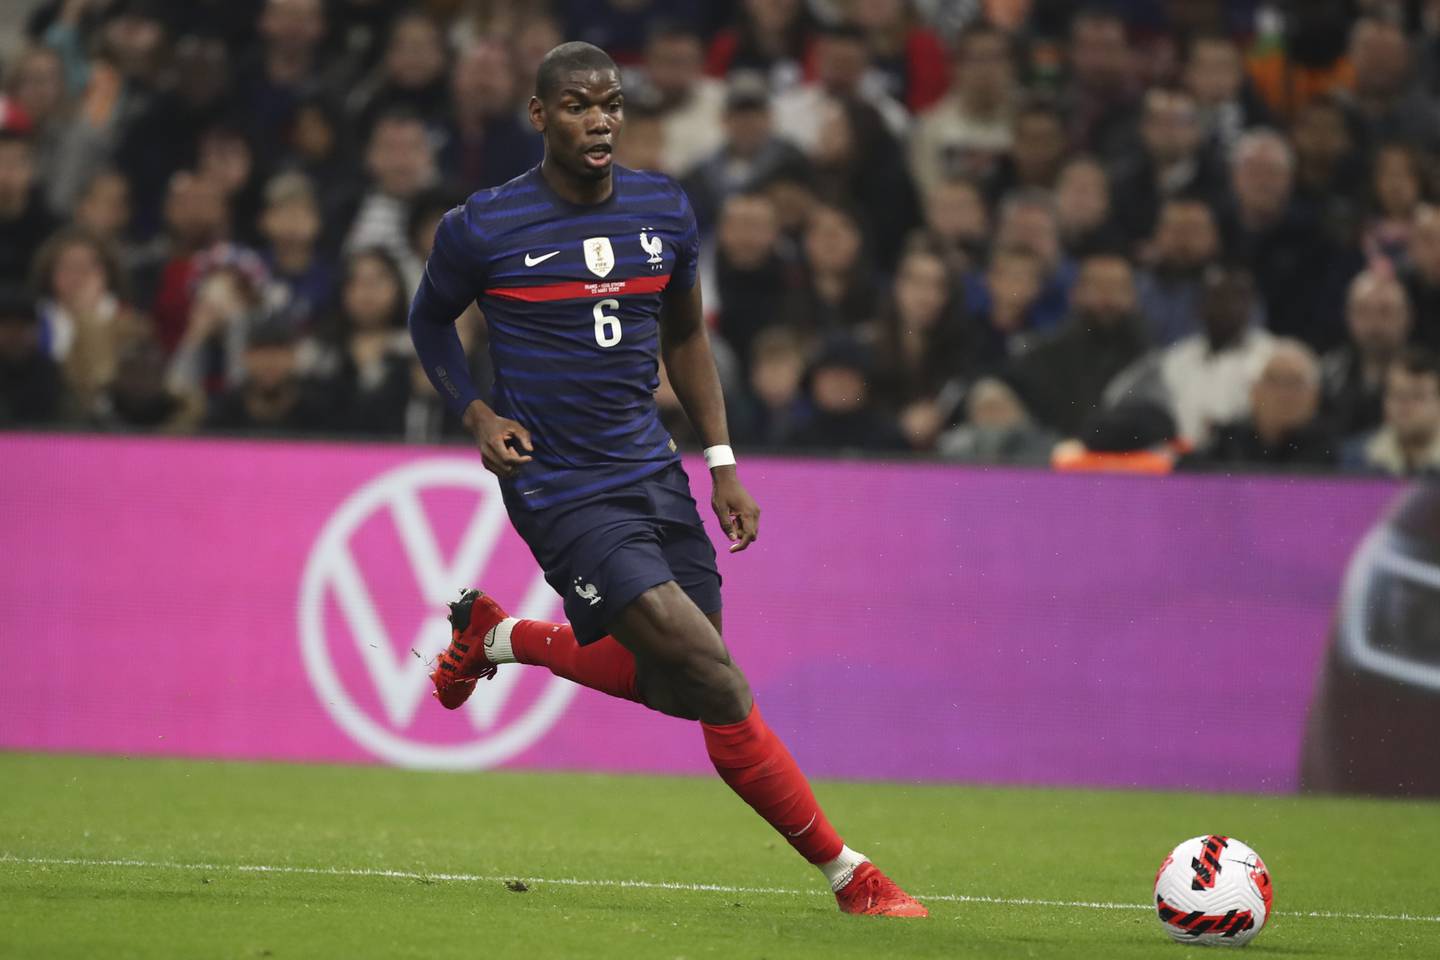 France's Paul Pogba runs with the ball during an international friendly against Cote d'Ivoire at the Velodrome stadium on March 25, 2022.